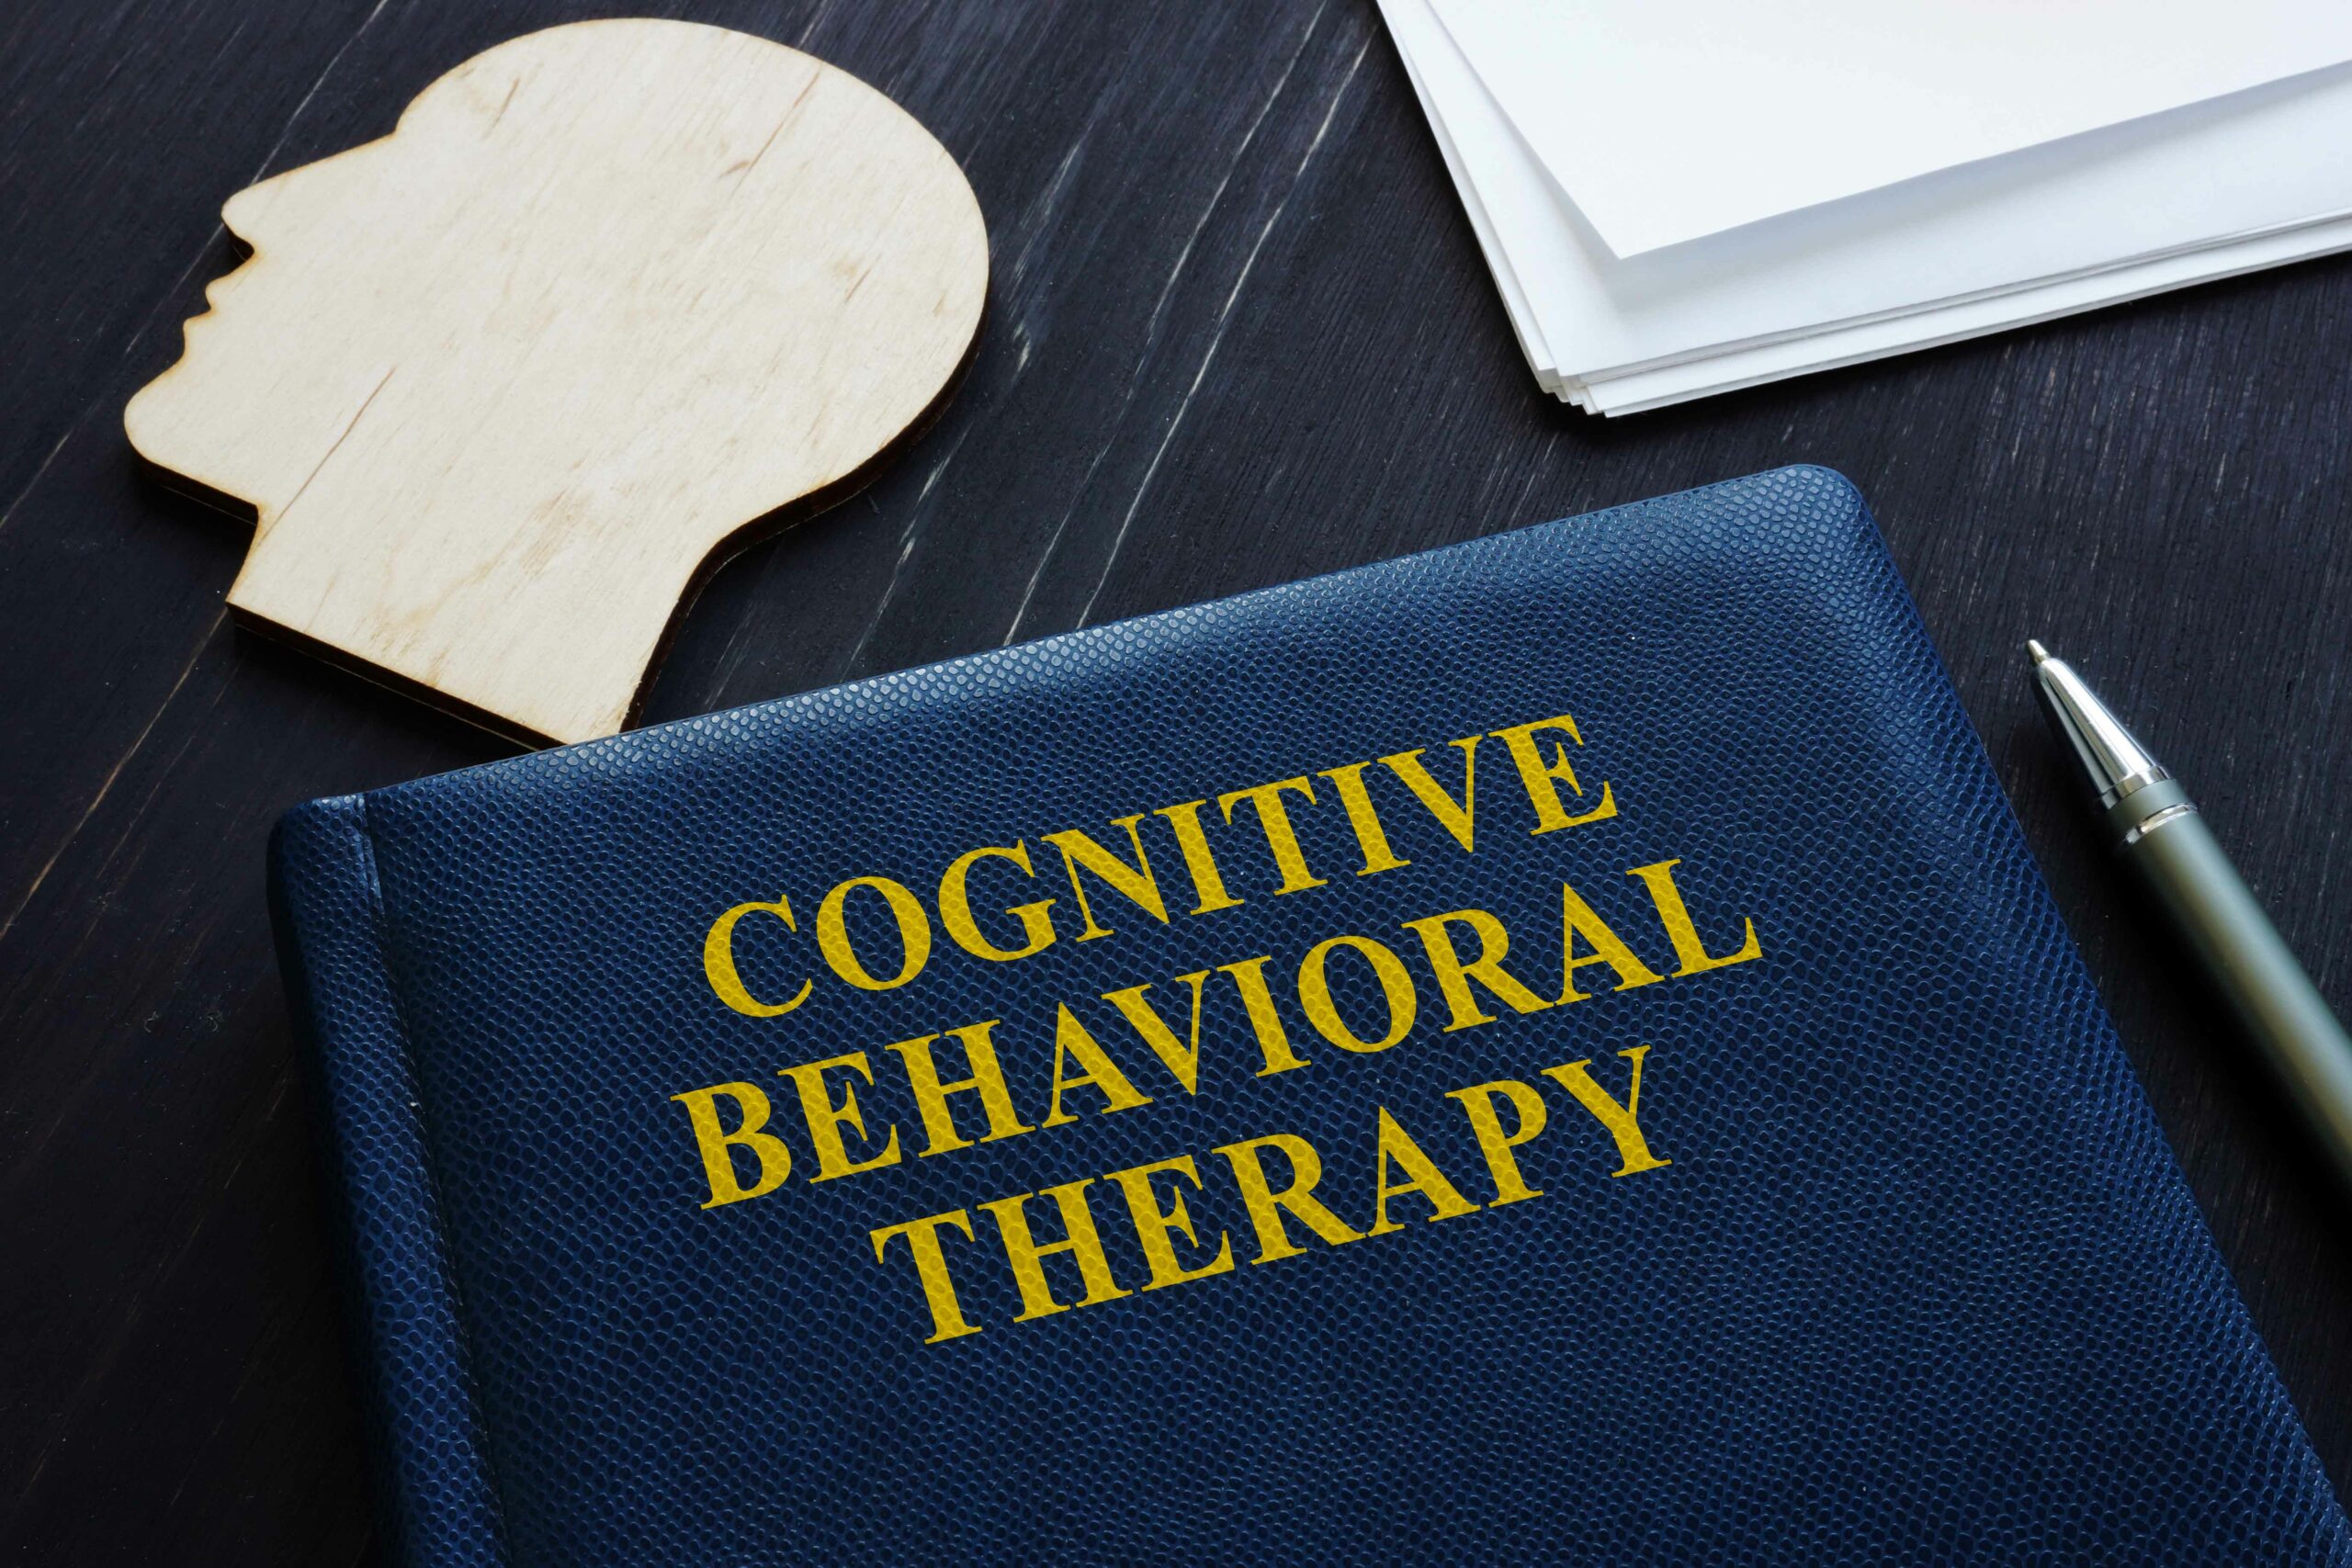 cbt therapy in nyc (cognitive behavioral therapy)